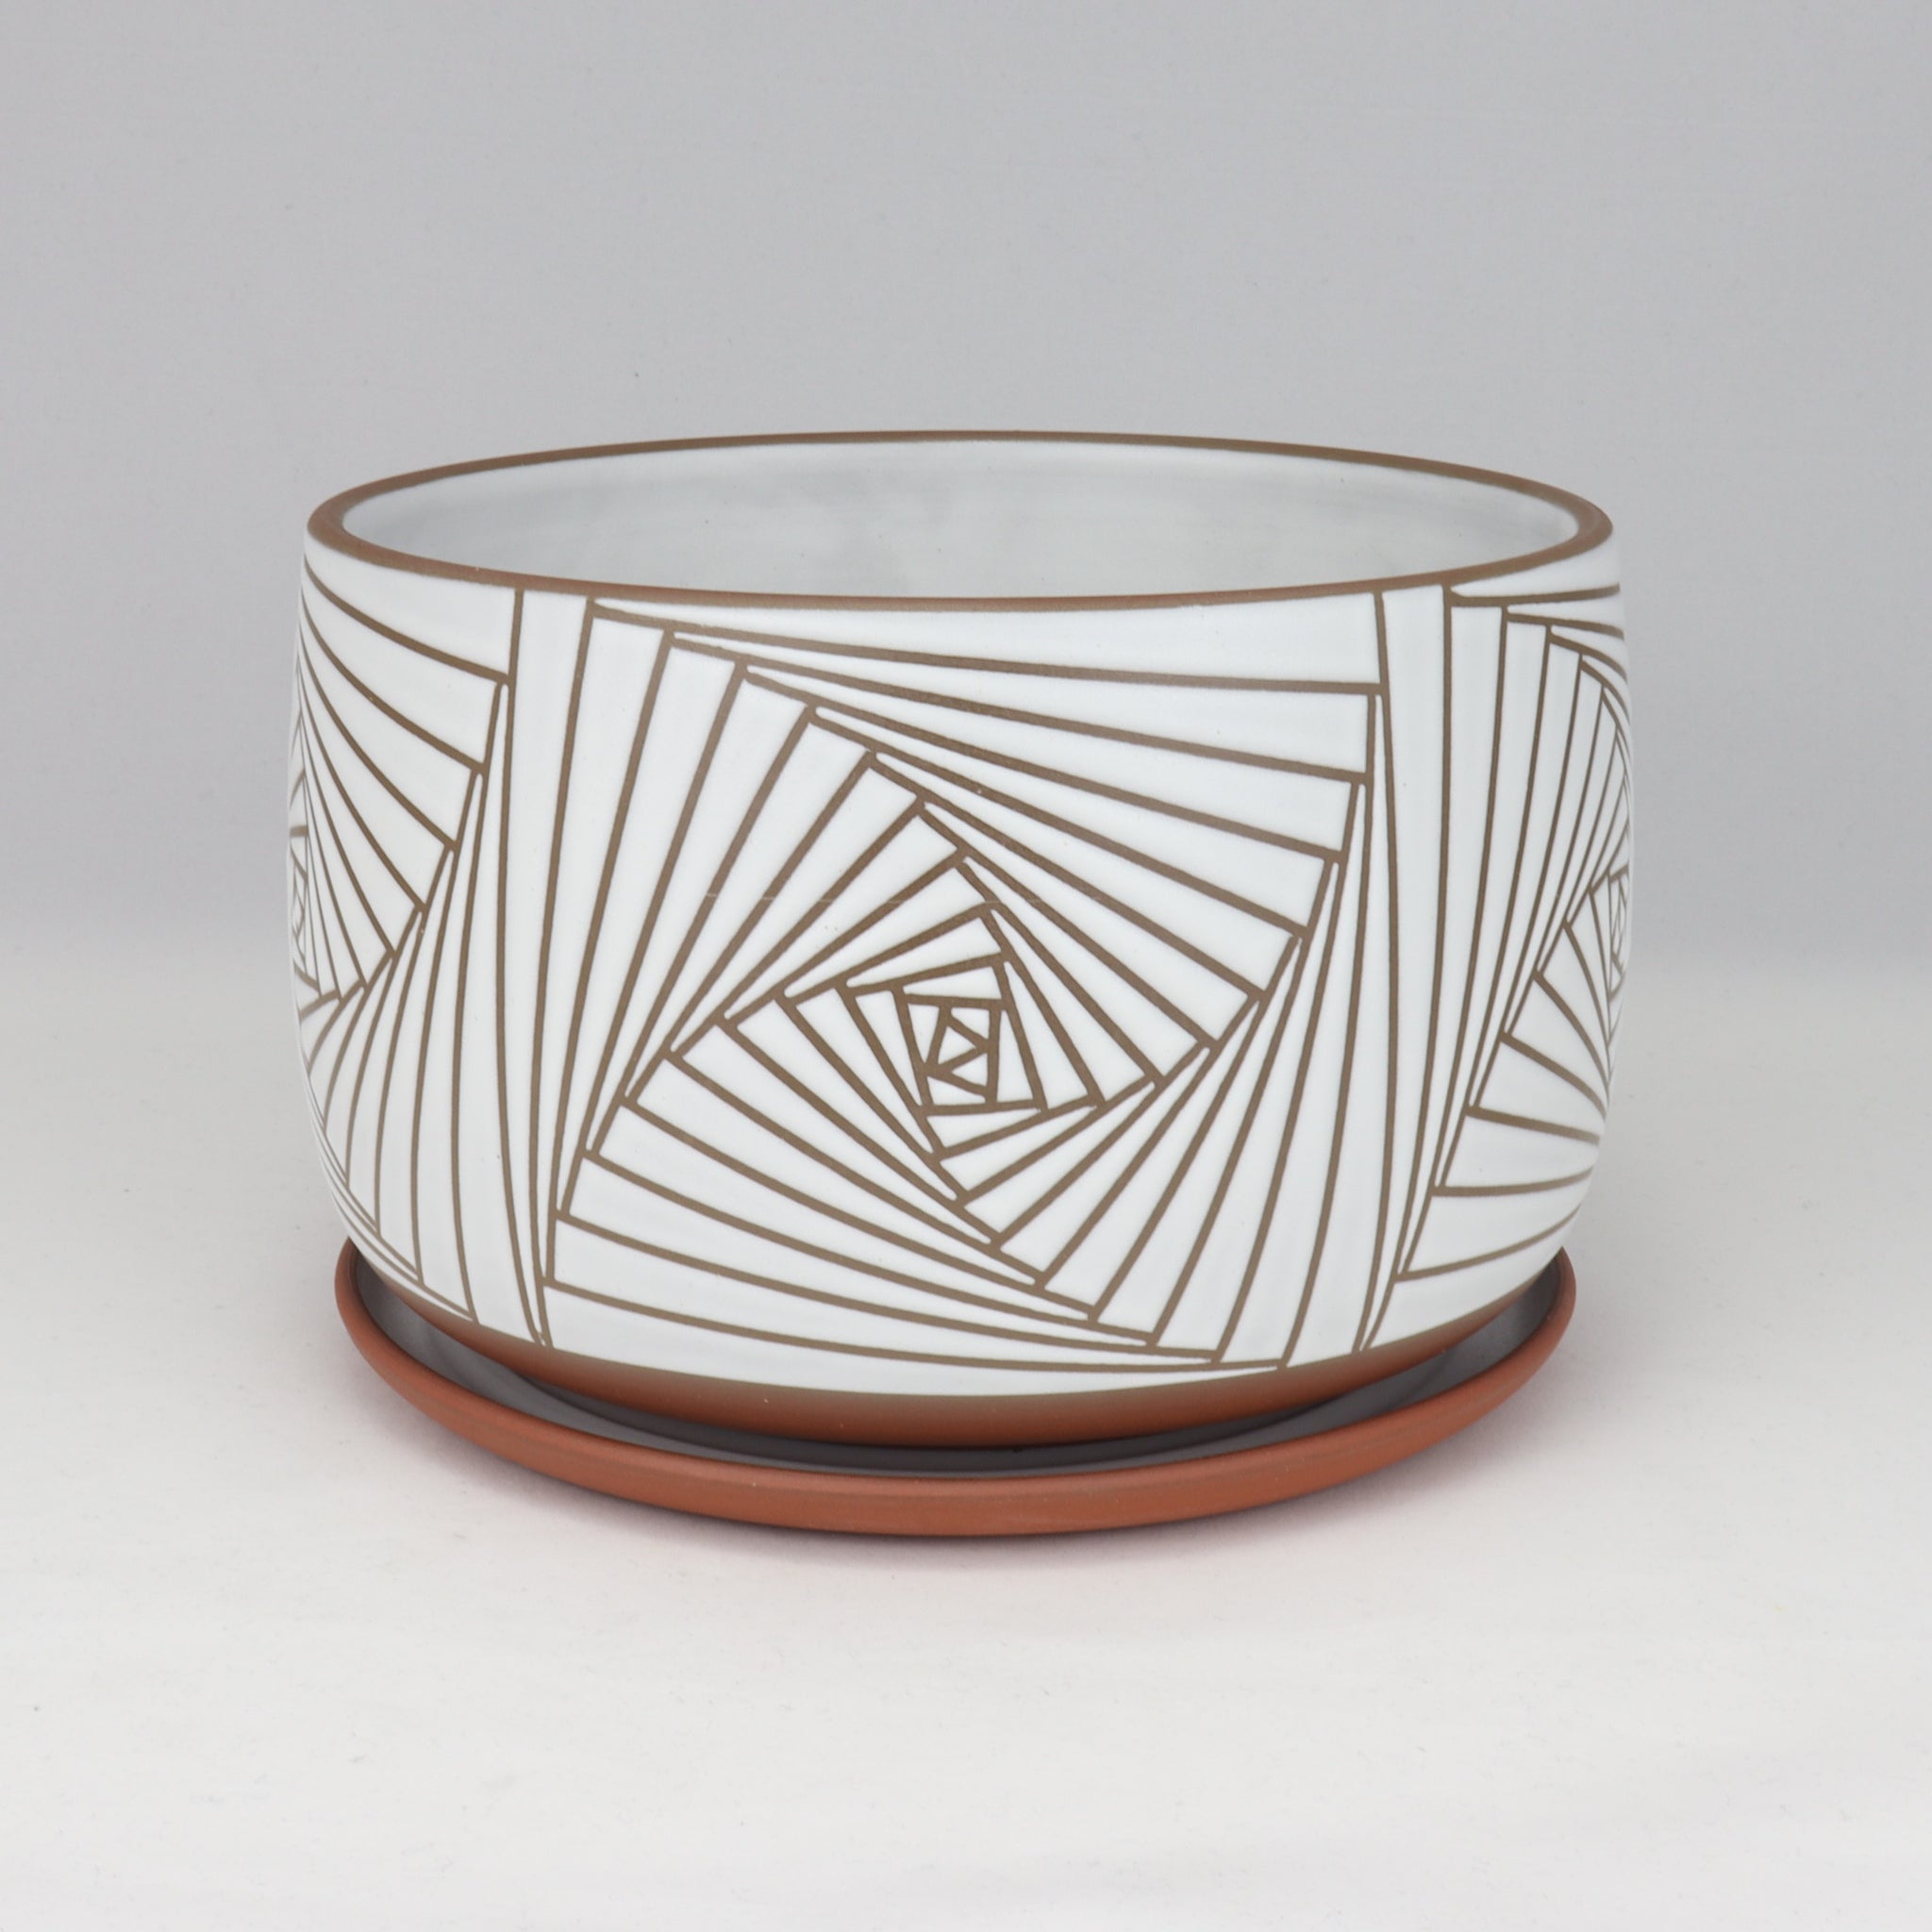 Paradox Planter on Red Clay 7 in / 18 cm Wide